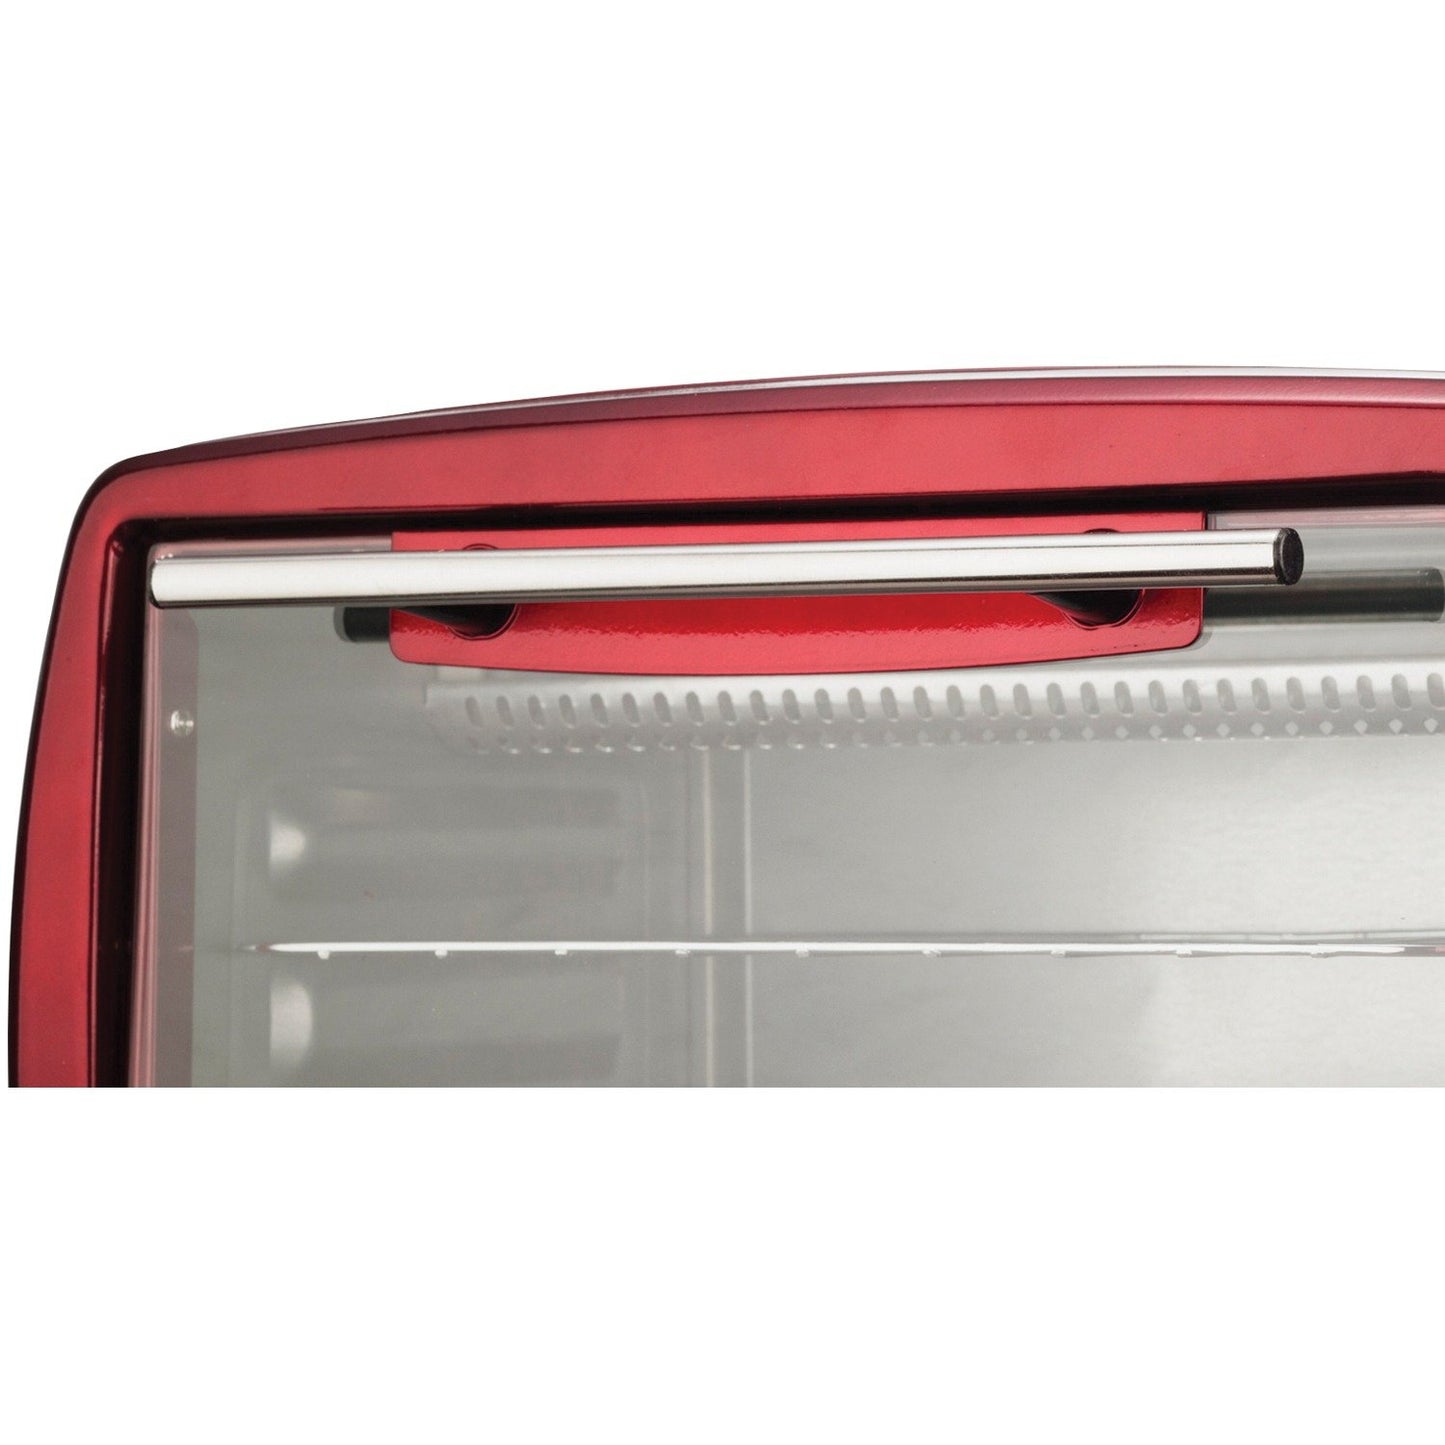 Brentwood Appliances TS-345R 4-Slice Toaster Oven and Broiler (Red)